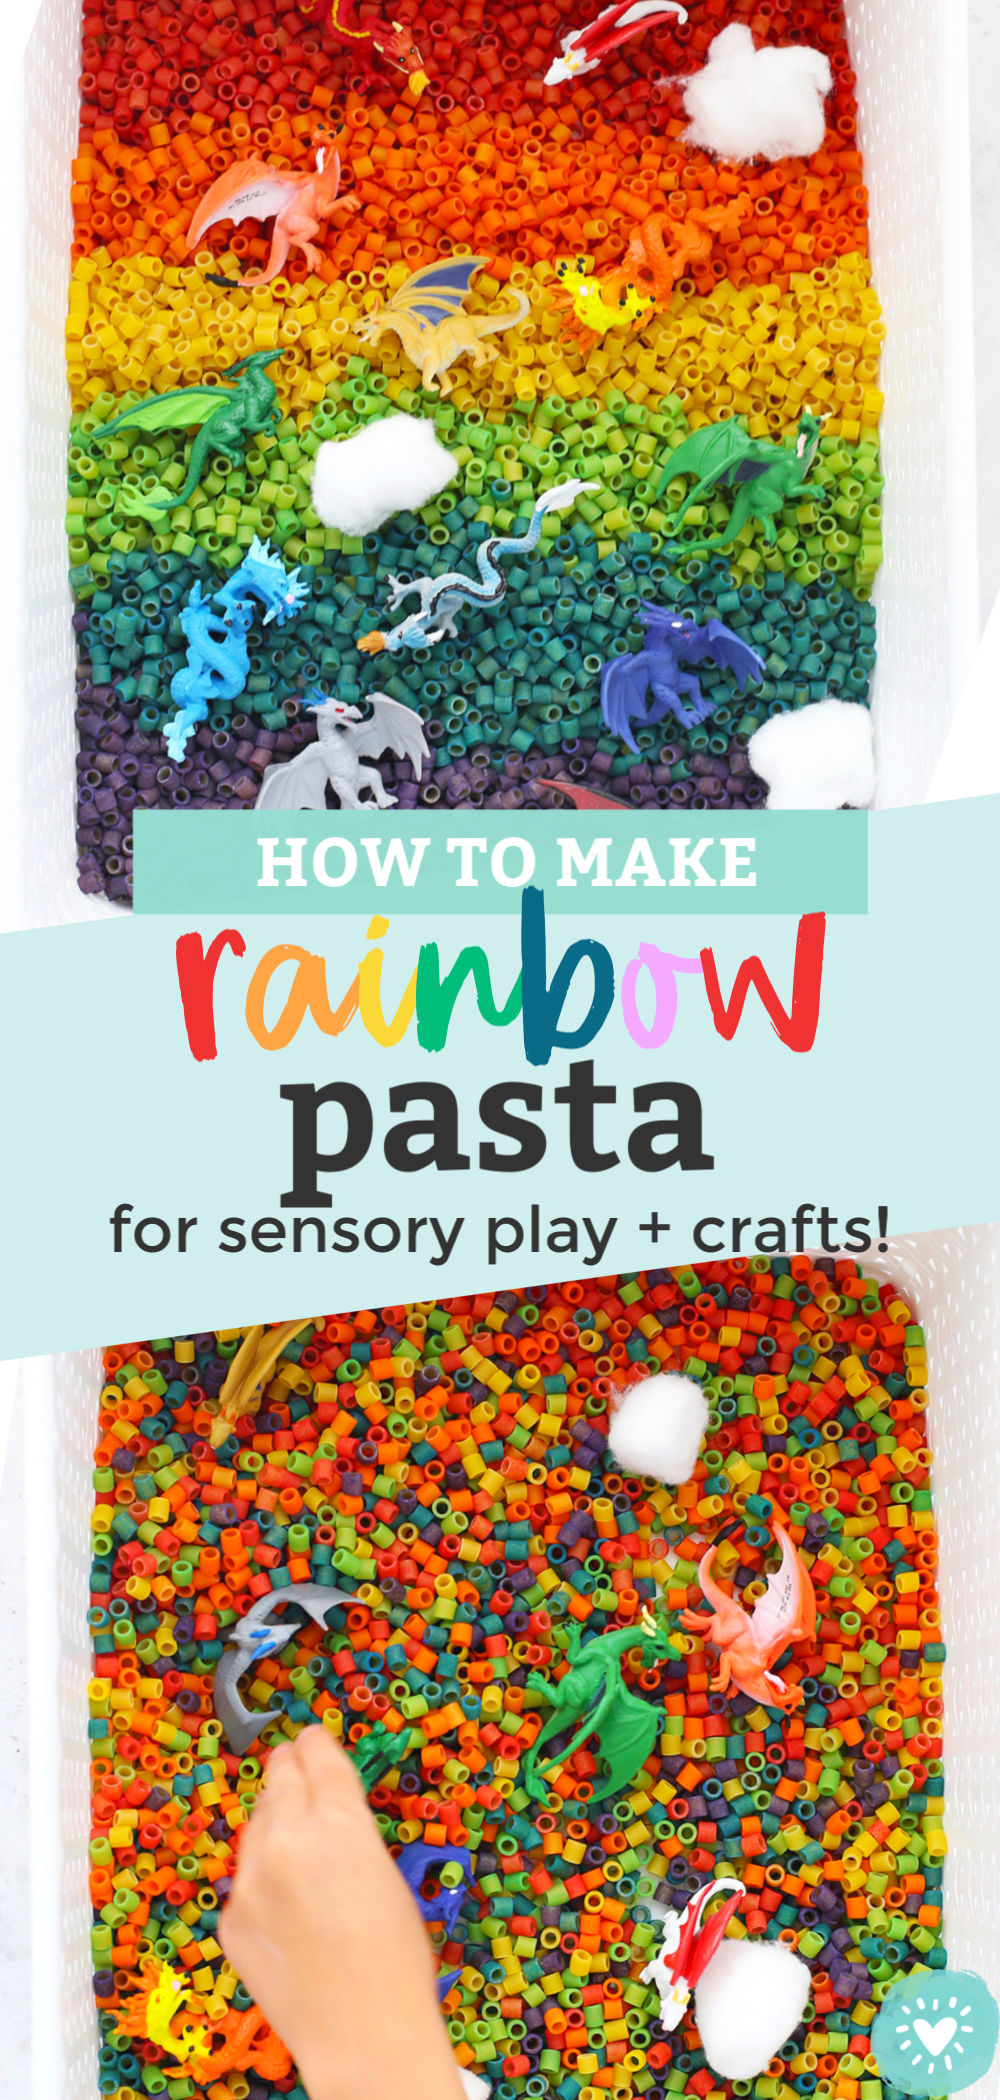 How to Make Rainbow Pasta Tutorial from One Lovely Life